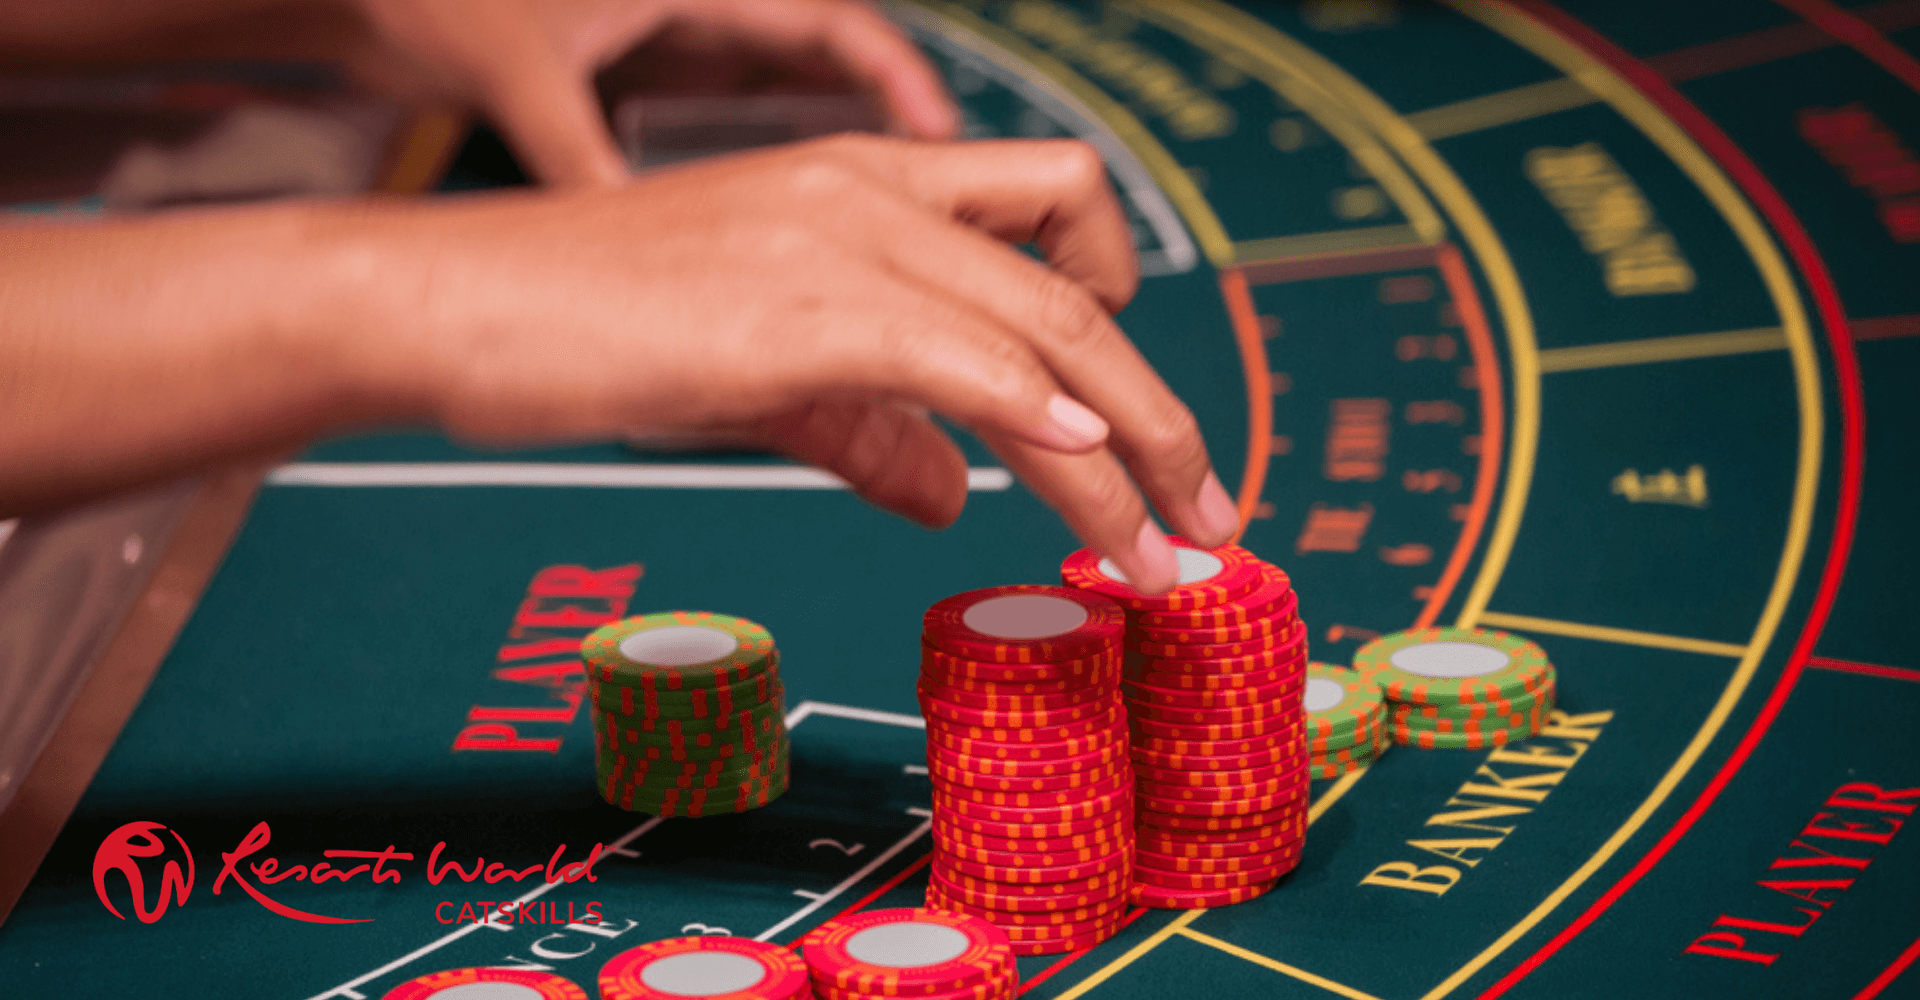 3 Things To Do To Learn How To Win AT Baccarat